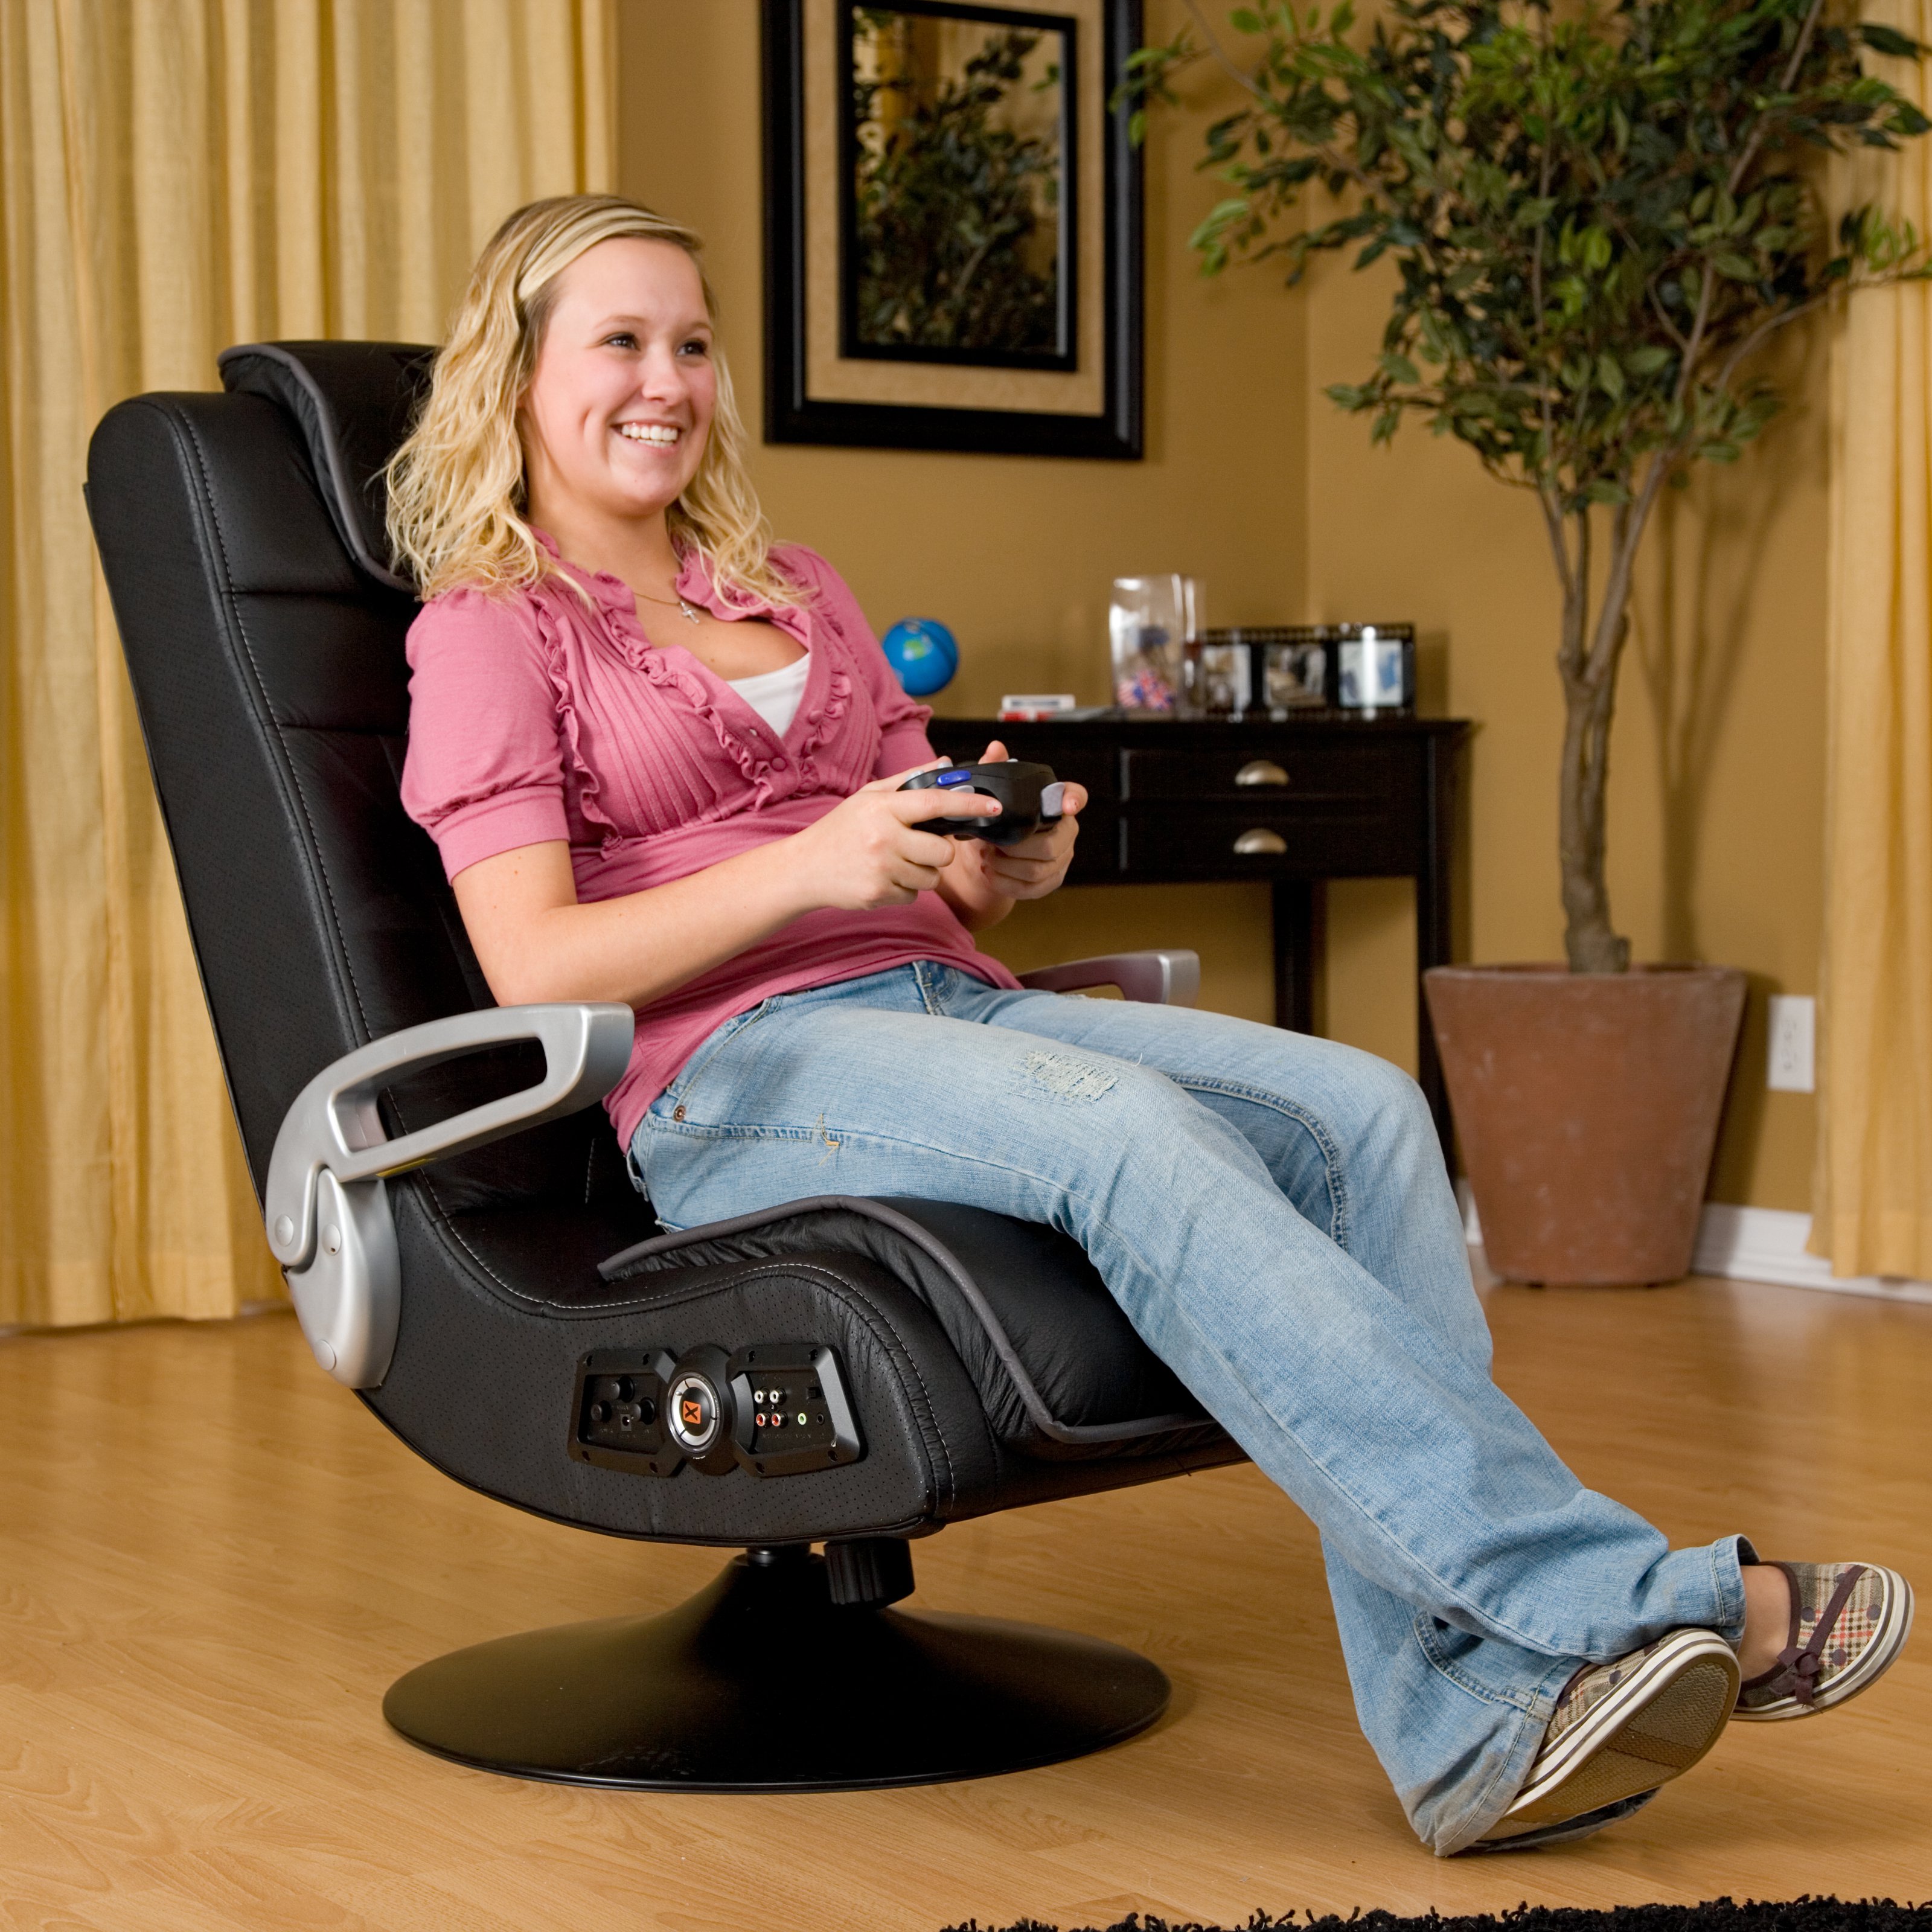 Want To Buy A Gaming Chair? Things You Should Look For!